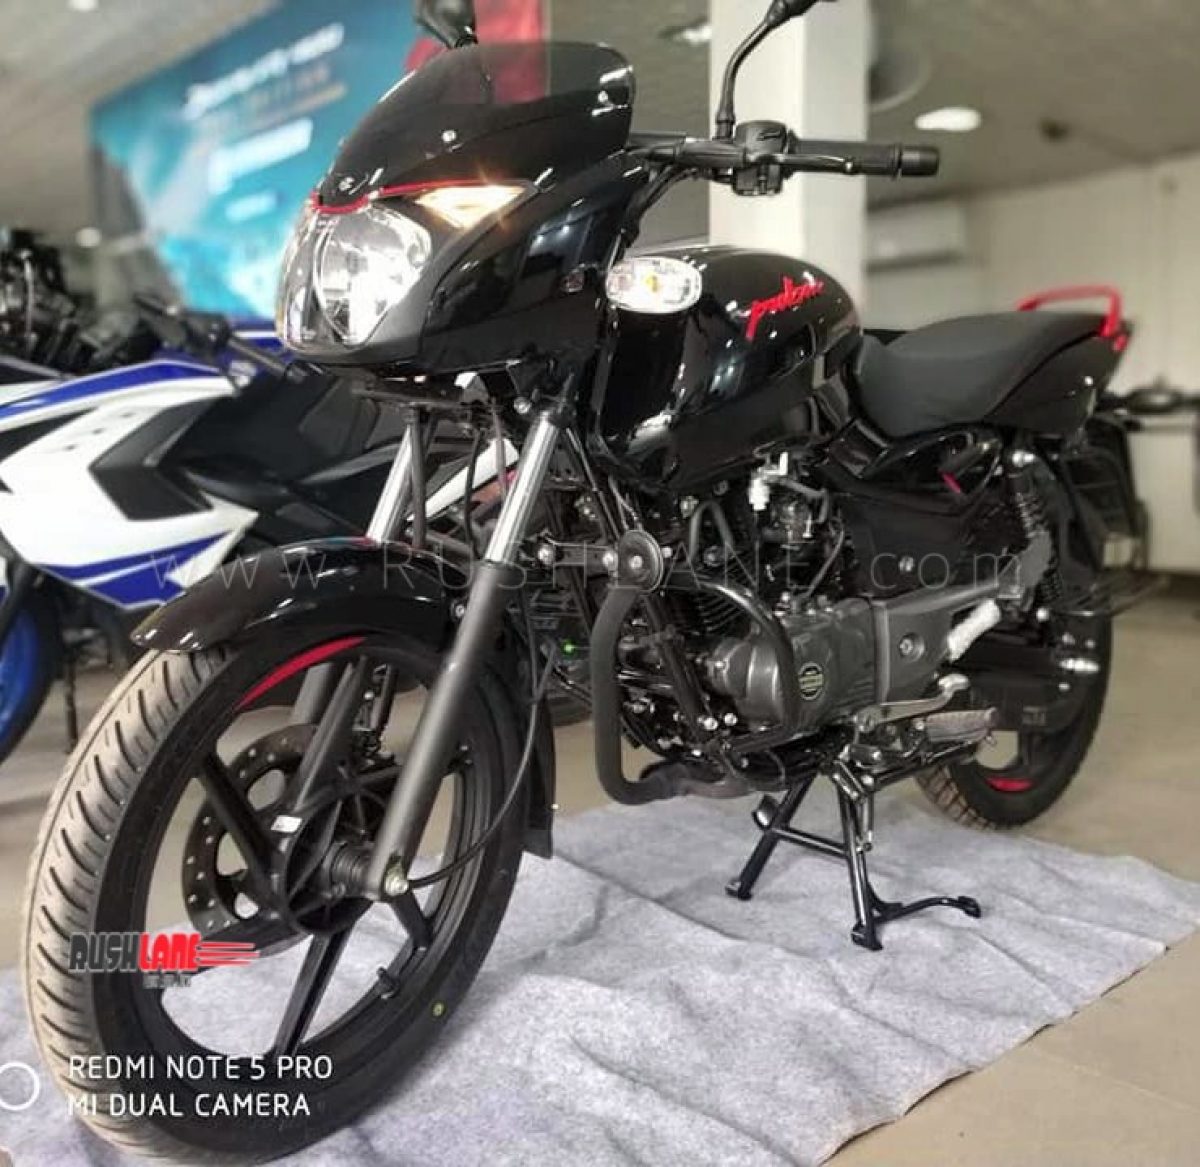 Bajaj Pulsar 150 Neon Red Silver Yellow Launched Price In Six